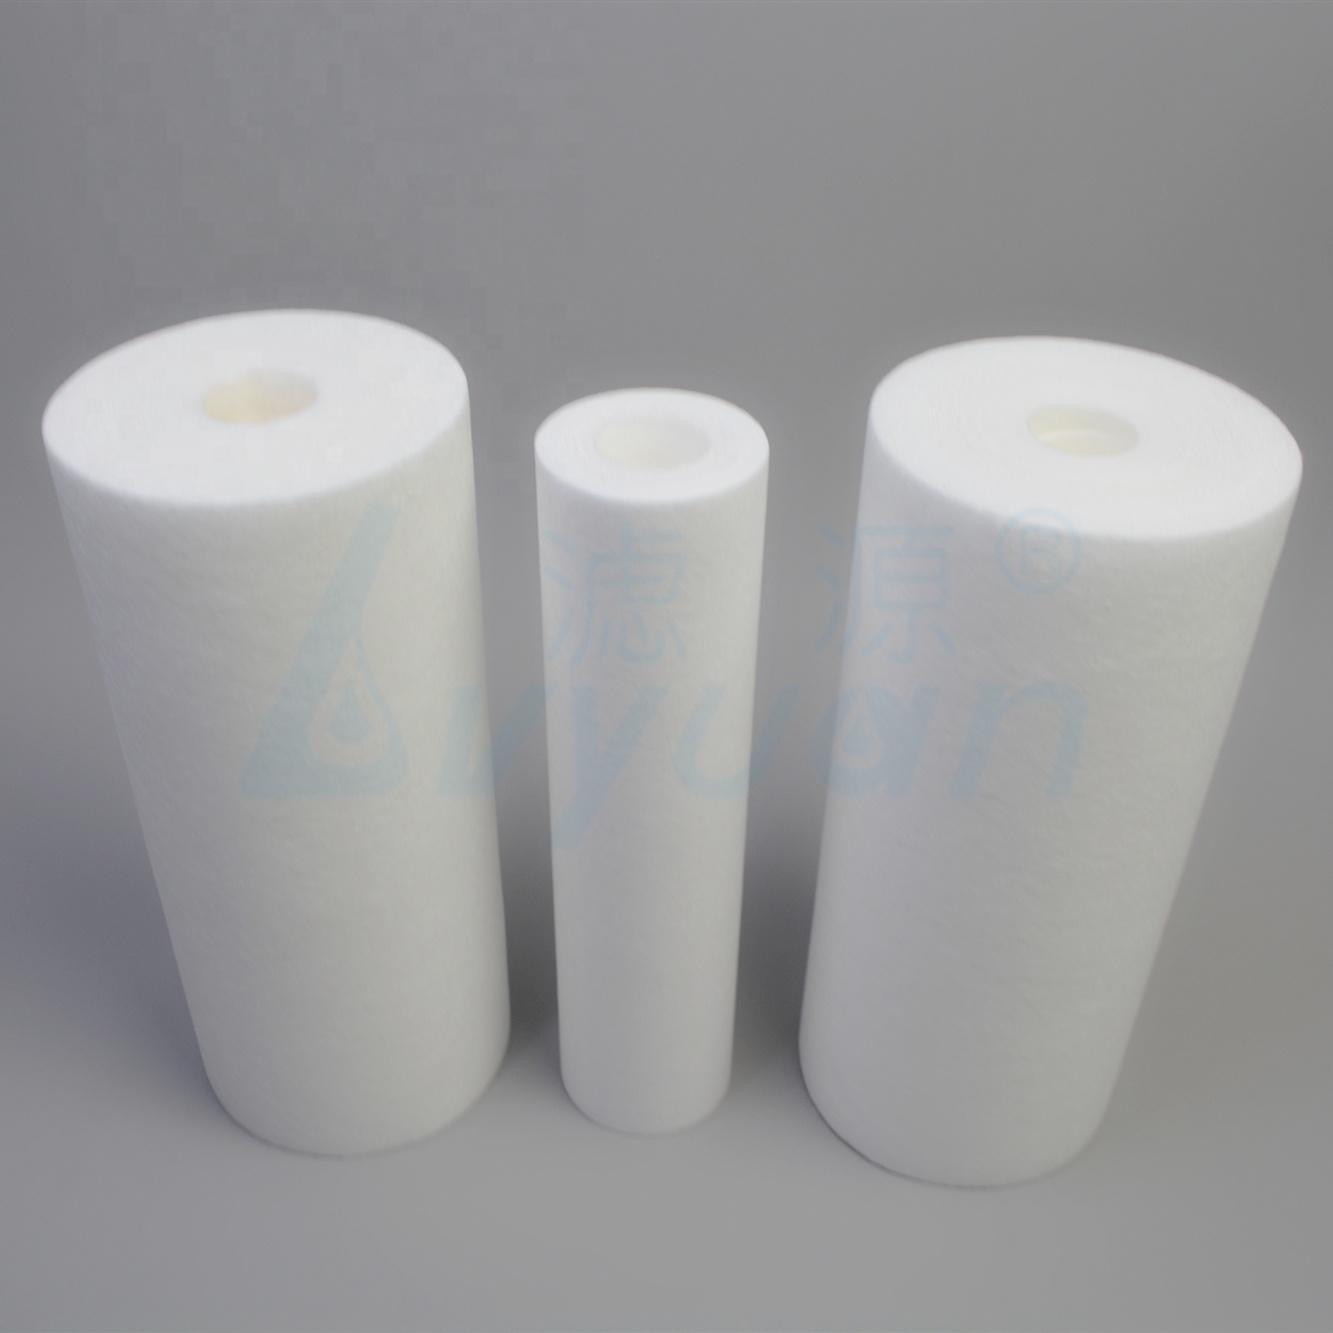 1 5 10Micron Filter Cartridges PP Sediment Filter for Industrial Water